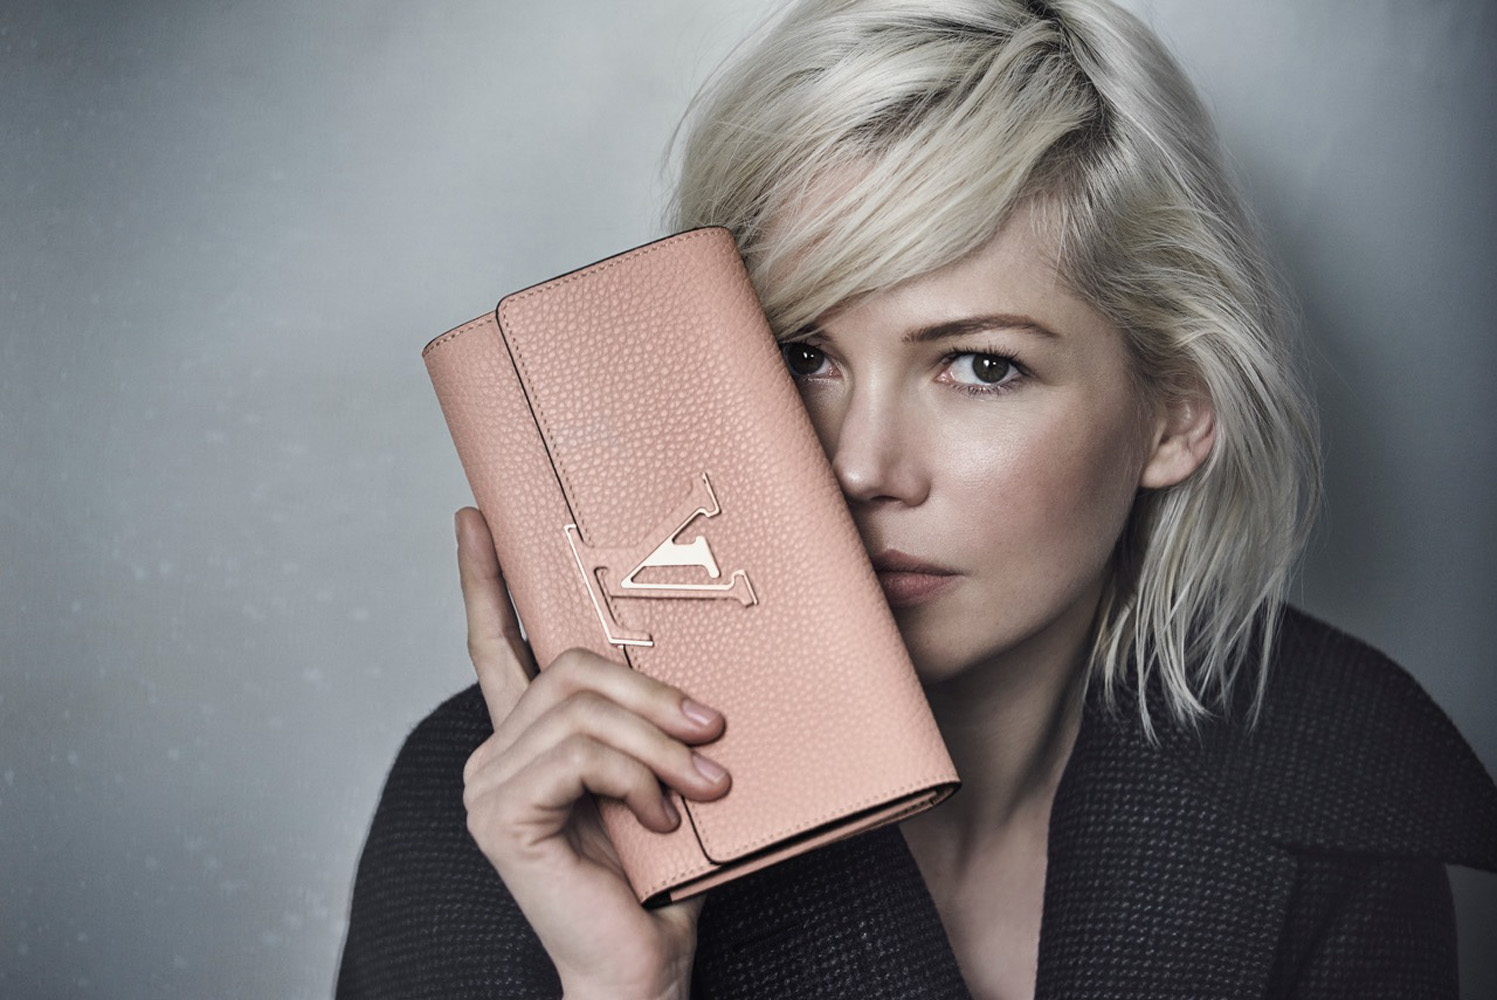 Louis Vuitton - Michelle Williams with the City Steamer handbag for the  Spirit of Travel Campaign from Louis Vuitton. See more from the campaign  now on